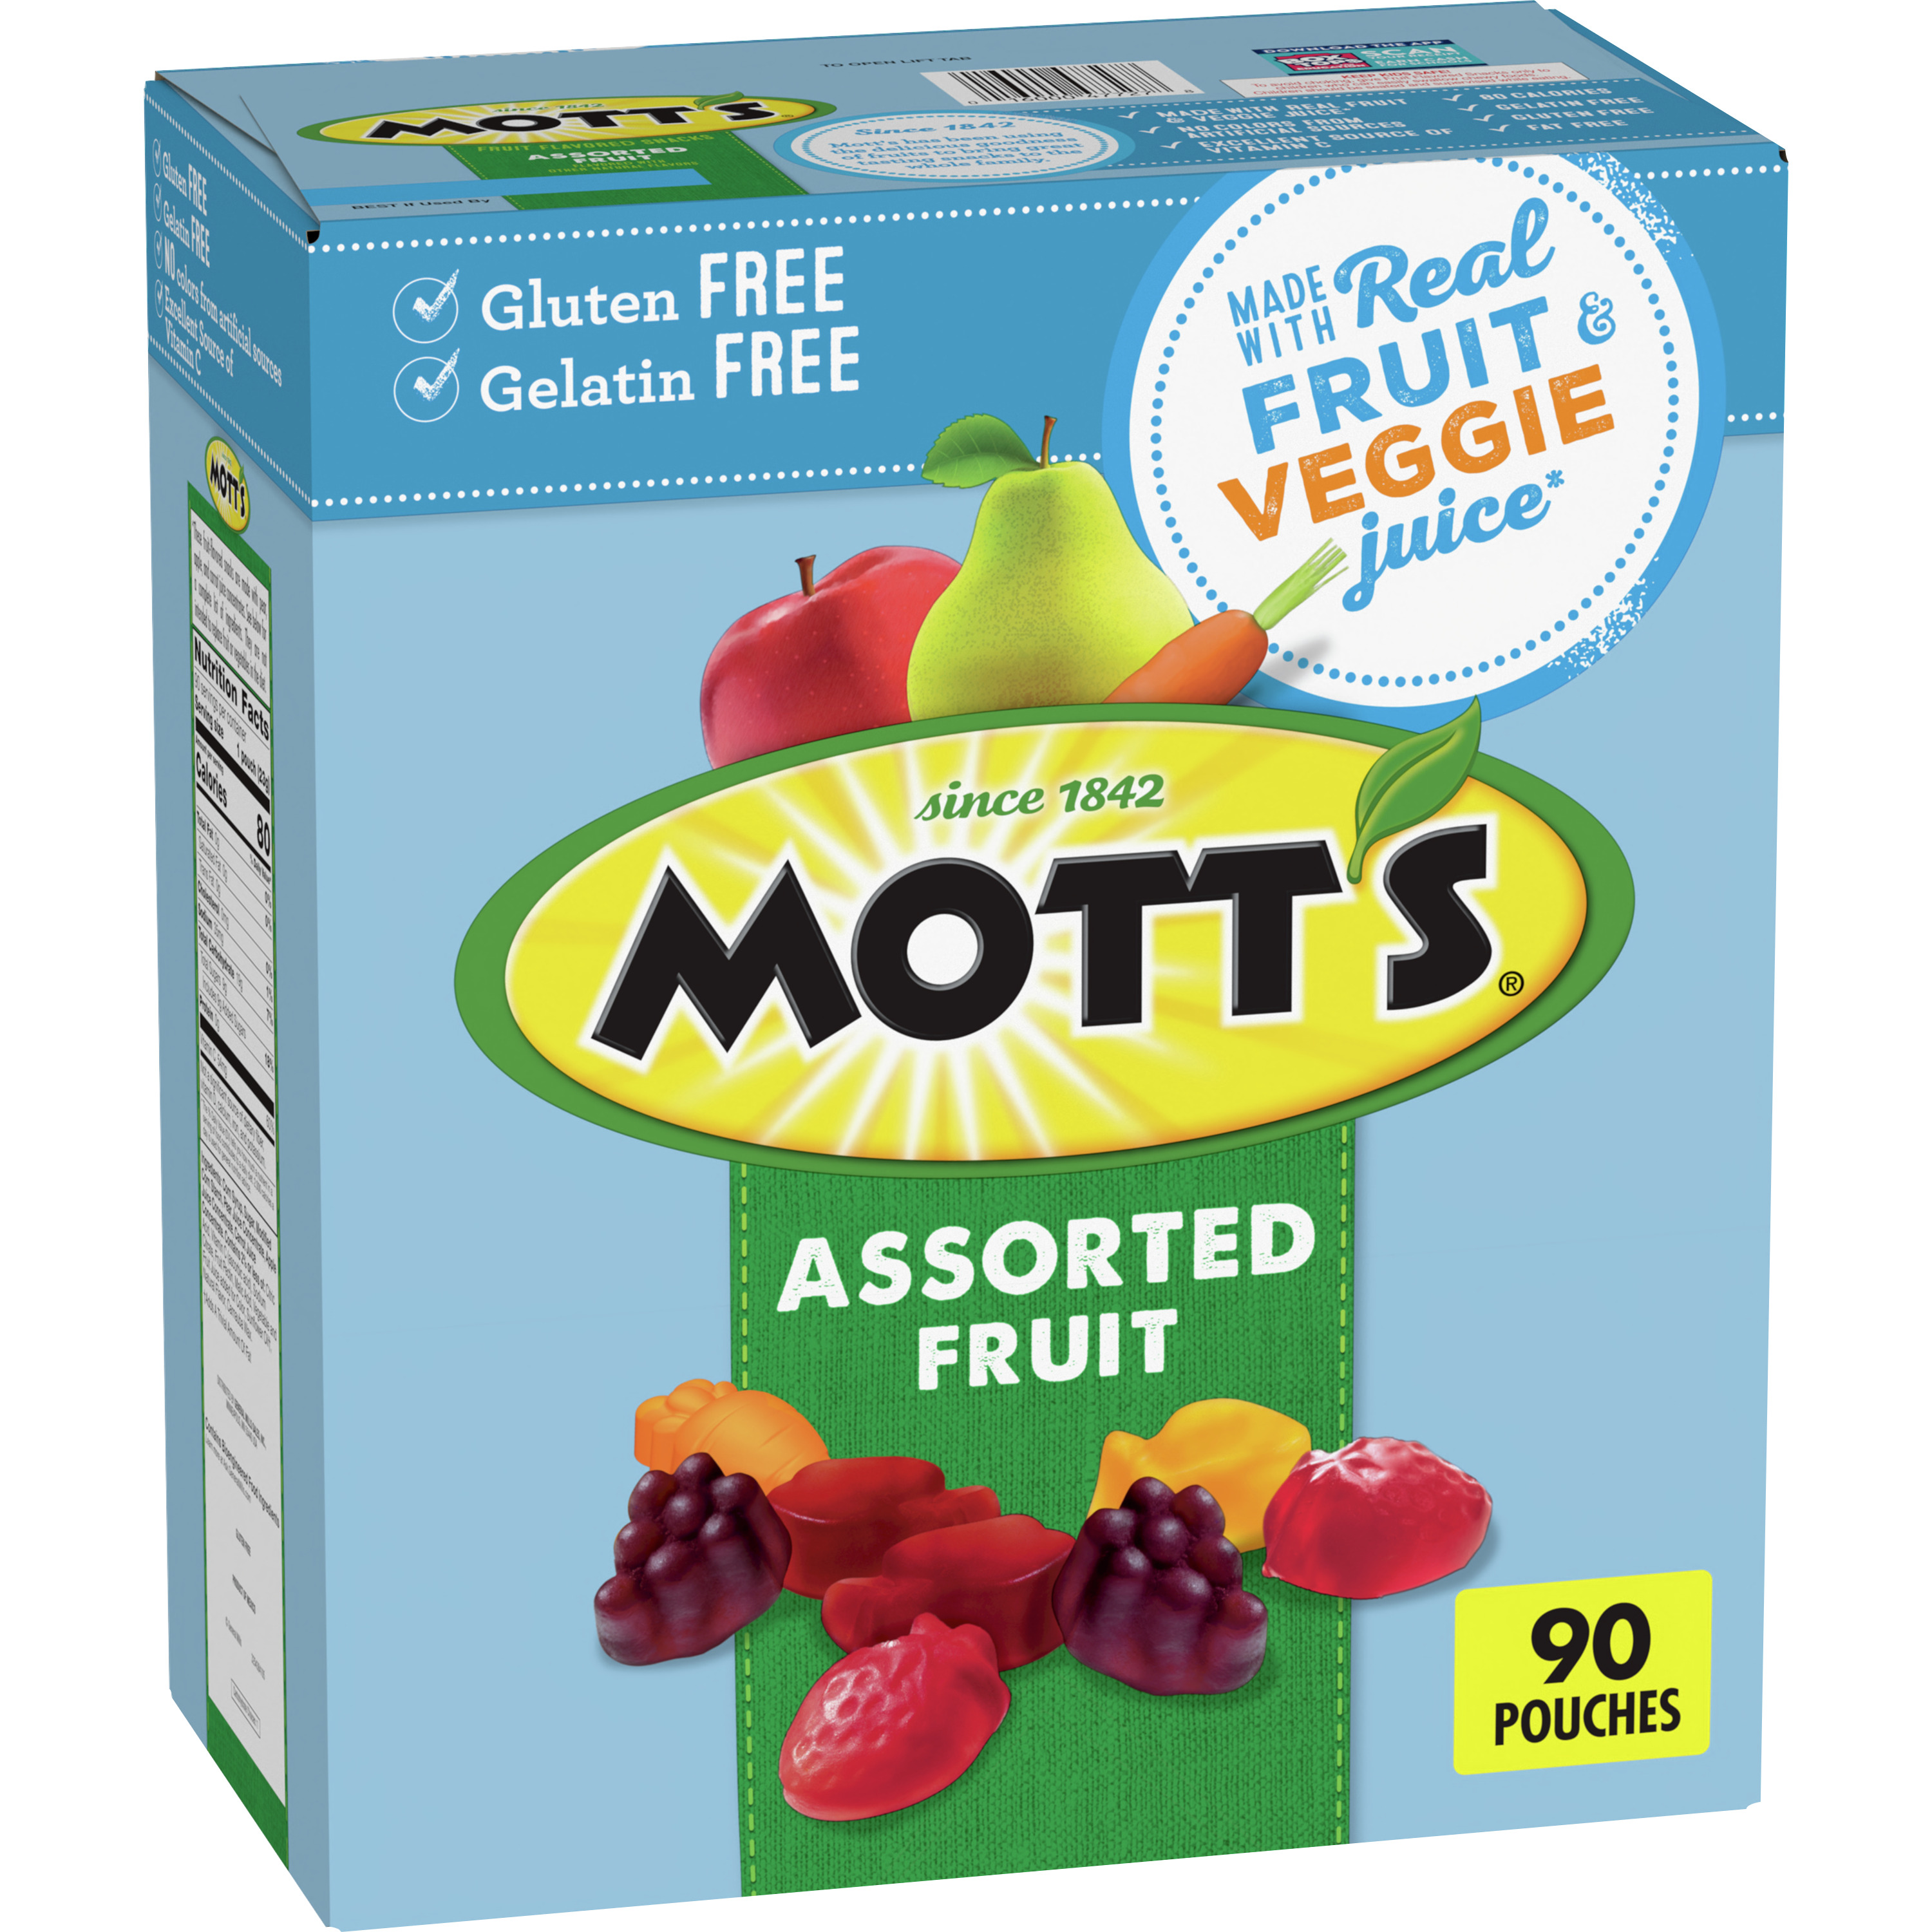 Mott's Fruit Flavored Snacks, Assorted Fruit, Pouches, 0.8 oz, 90 ct - image 1 of 9